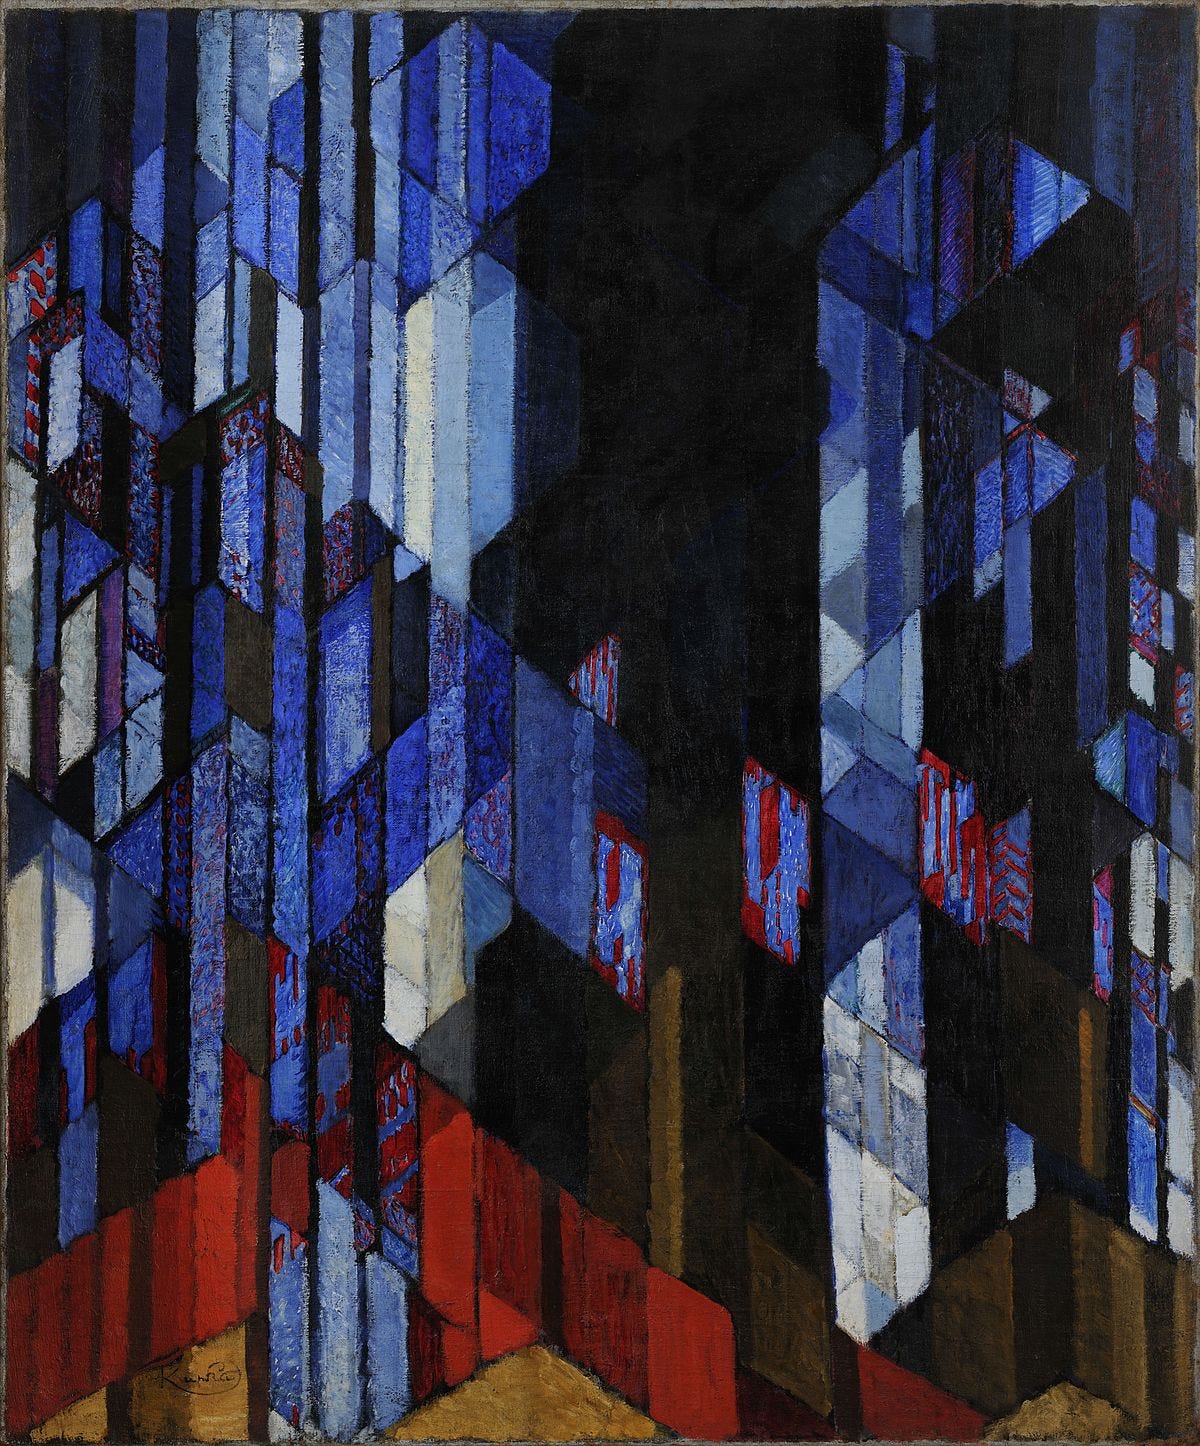 An abstract painting of blue and red vertical rectangles